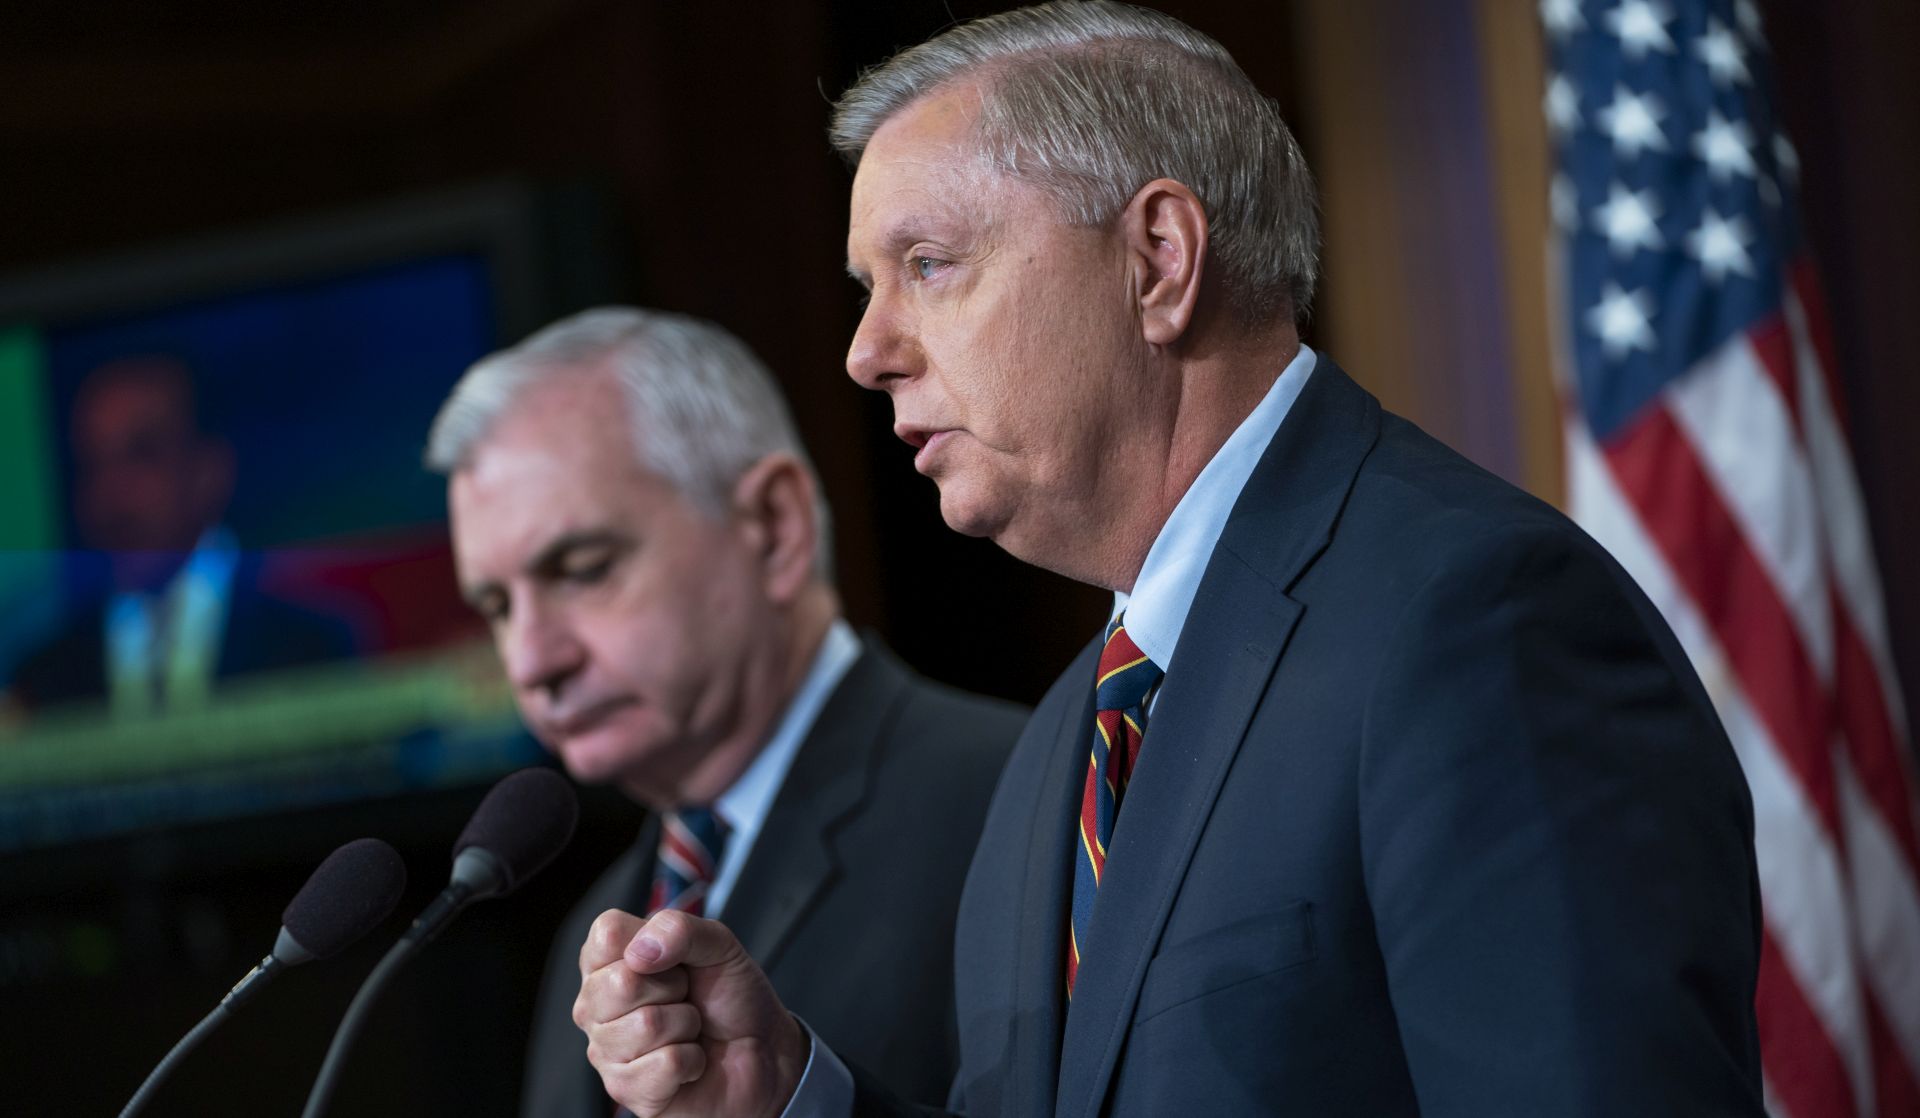 epa07242498 Republican Senator from South Carolina Lindsey Graham (R), along with Democratic Senator from Rhode Island Jack Reed (L), speaks to the media about President Trump's decision to withdraw American troops from Syria in the US Capitol in Washington, DC, USA, 20 December 2018. Russian President Vladimir Putin praised the move, while members of Trump's own party have expressed alarm at the decision.  EPA/JIM LO SCALZO